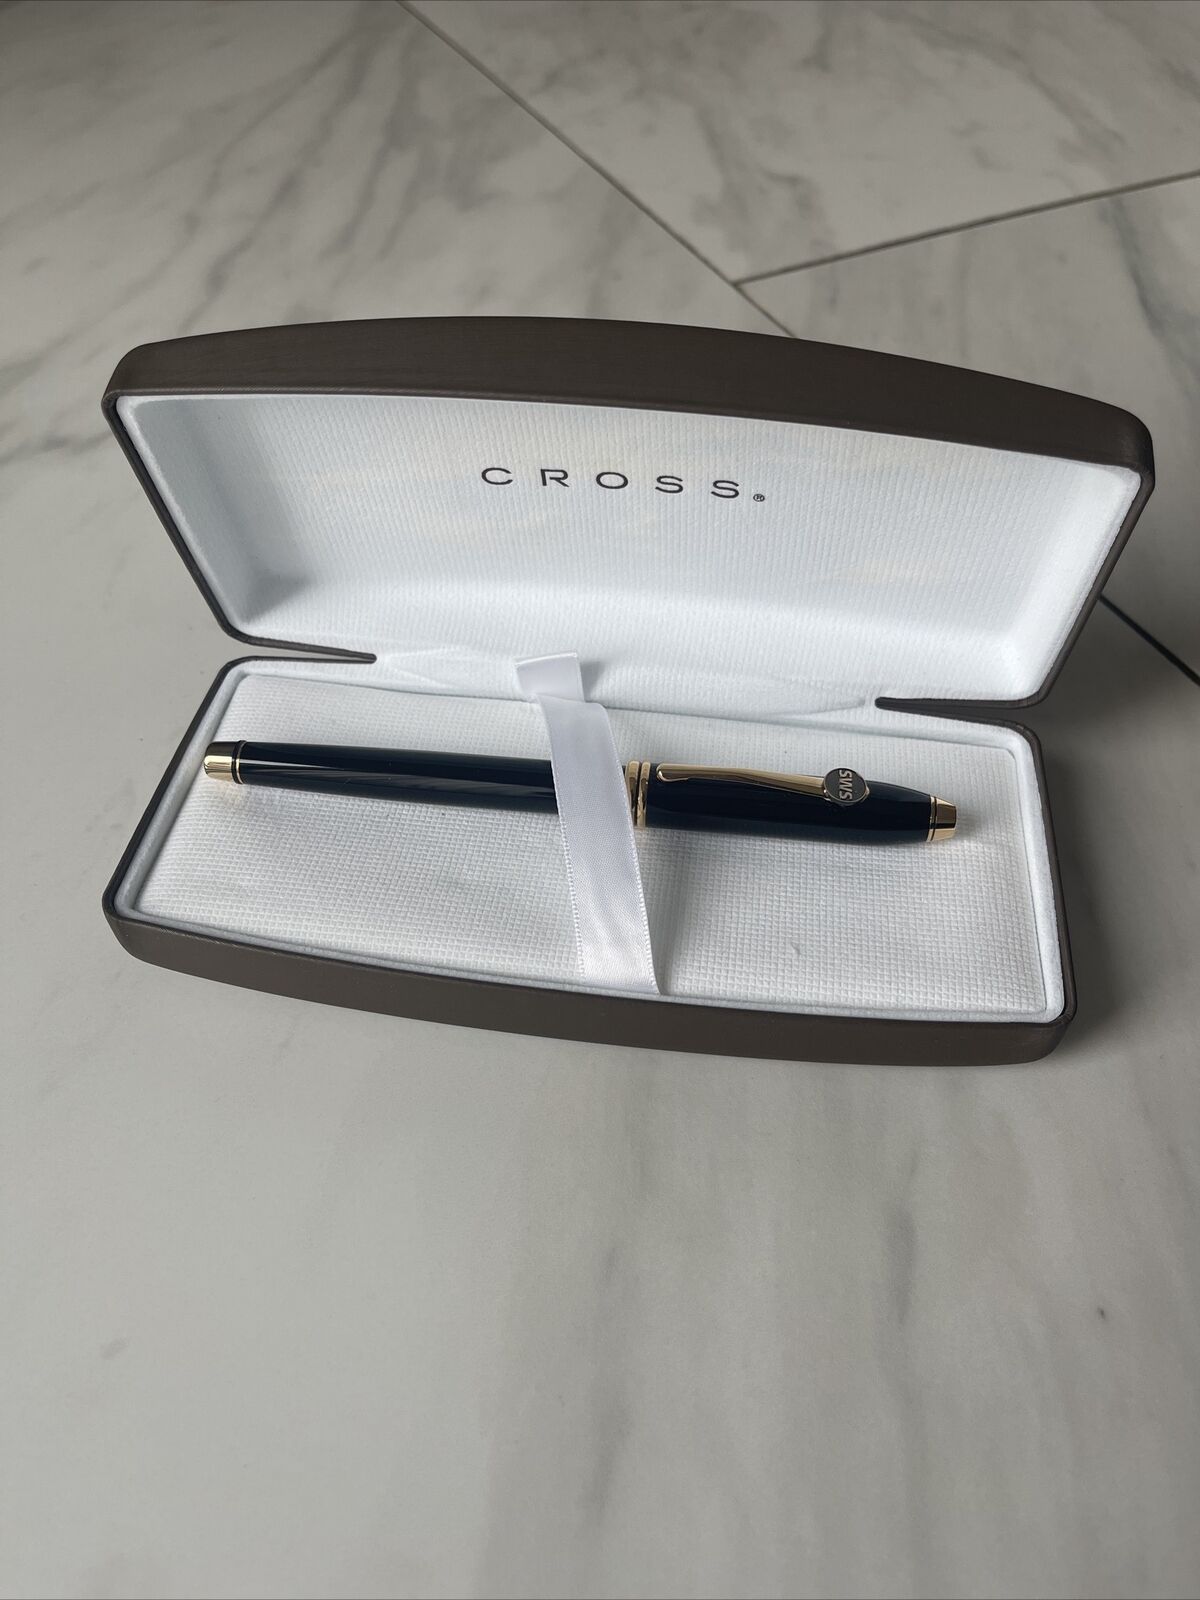 CROSS TOWNSEND BLACK LACQUER WITH 23K GOLD PLATED ROLLER BALL PEN MAGNIFICENT